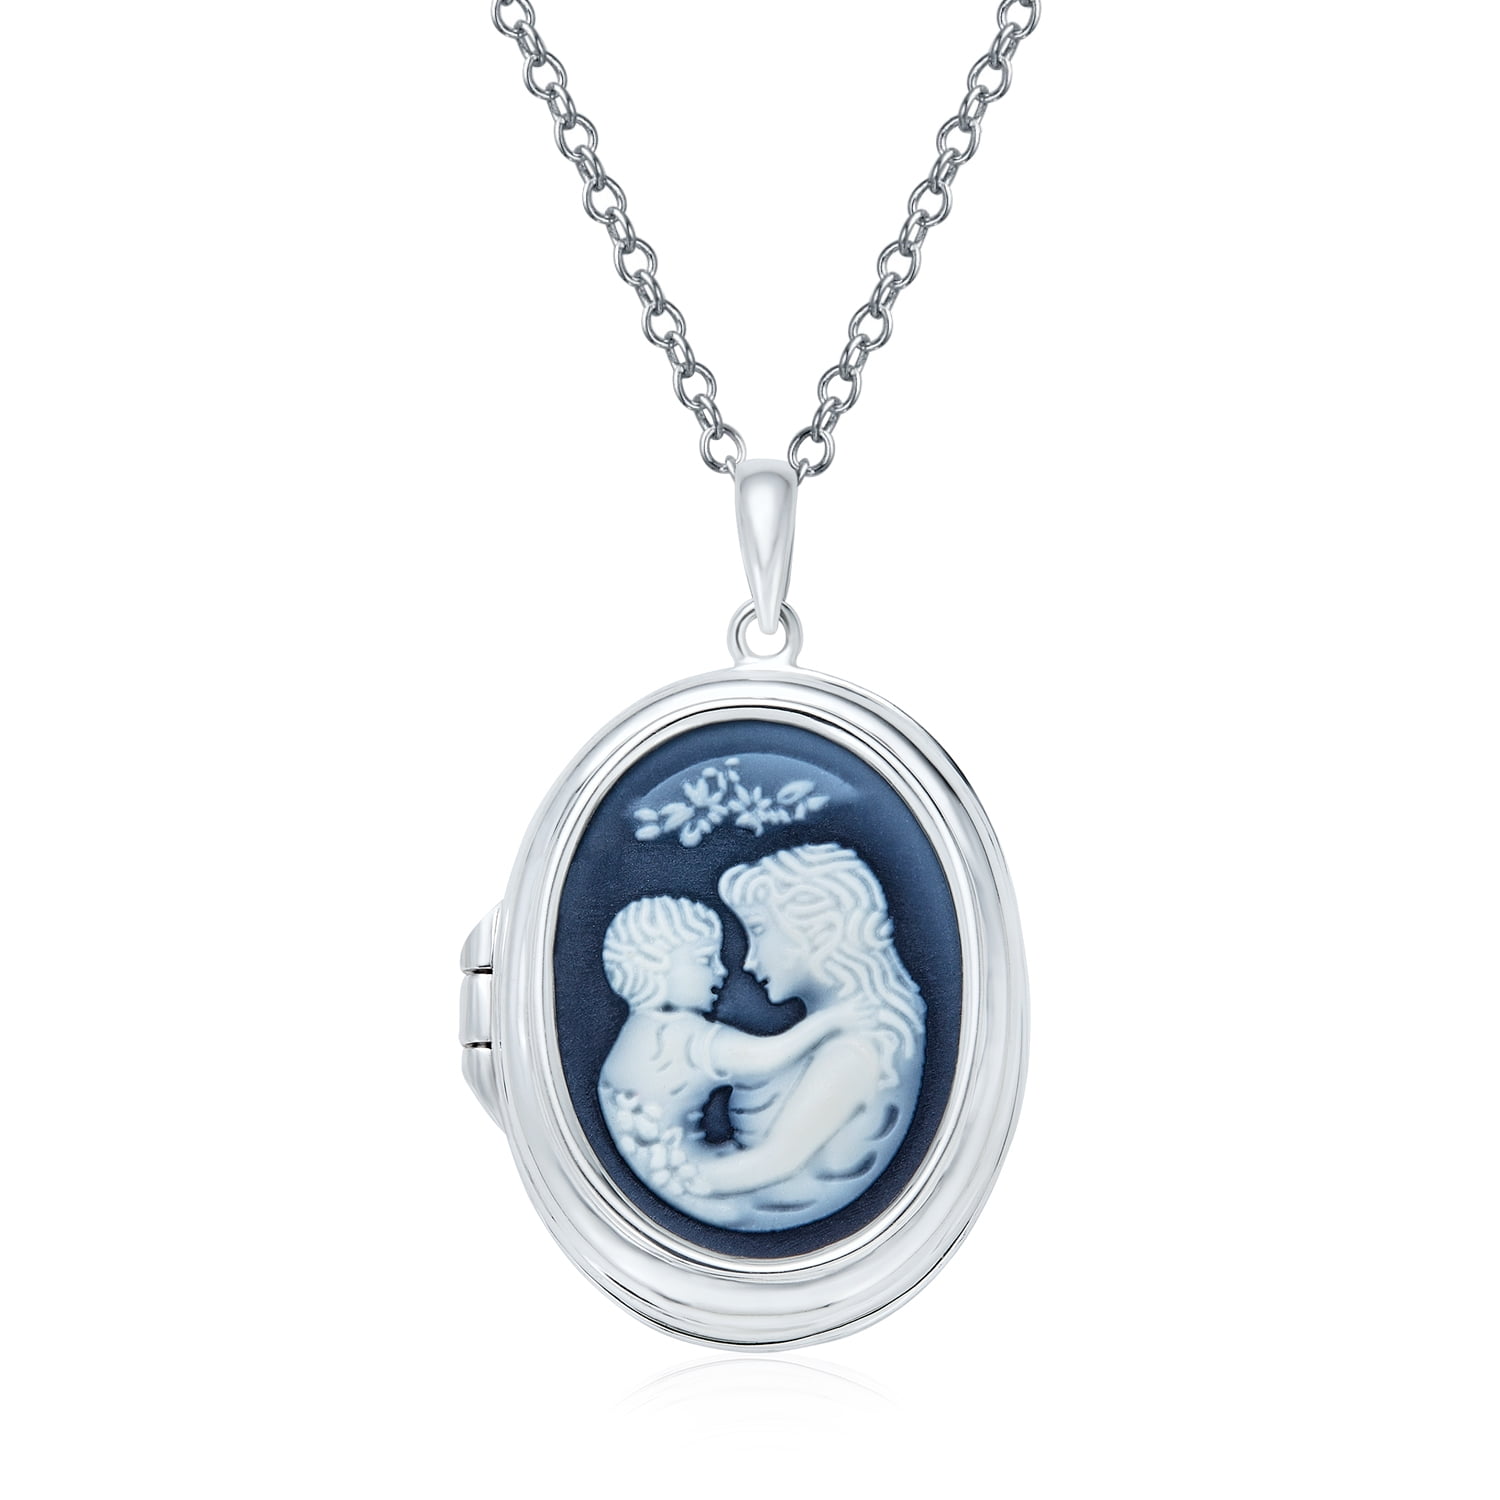 Royal Child Engraving Pendant by Faith Life 925 Sterling Silver Jewelry for Personalizing